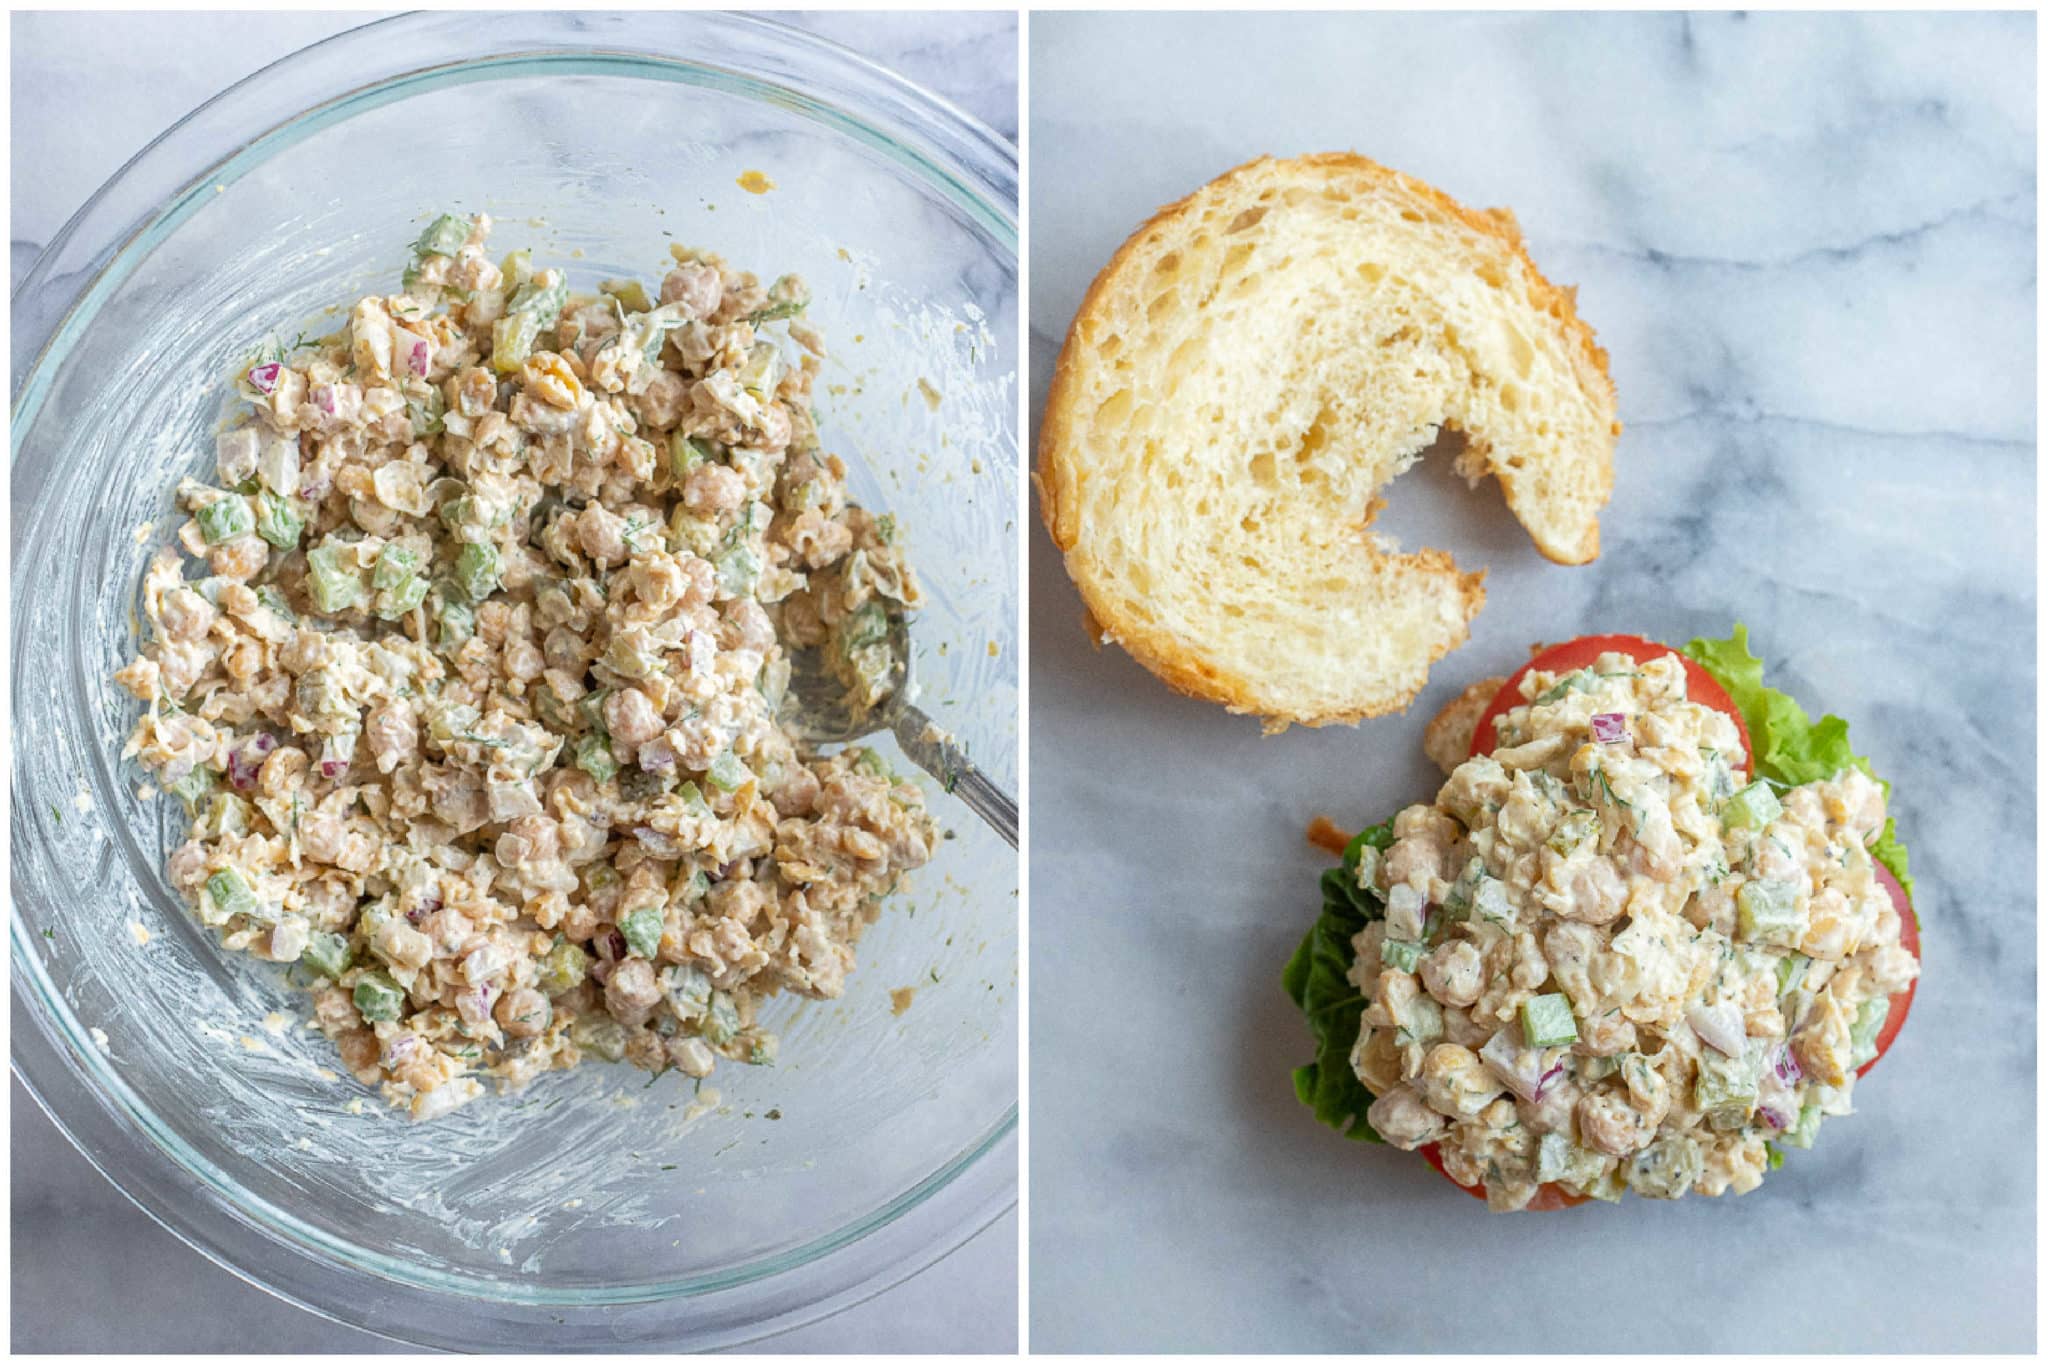 showing how to assemble a vegetarian tuna salad croissant sandwich